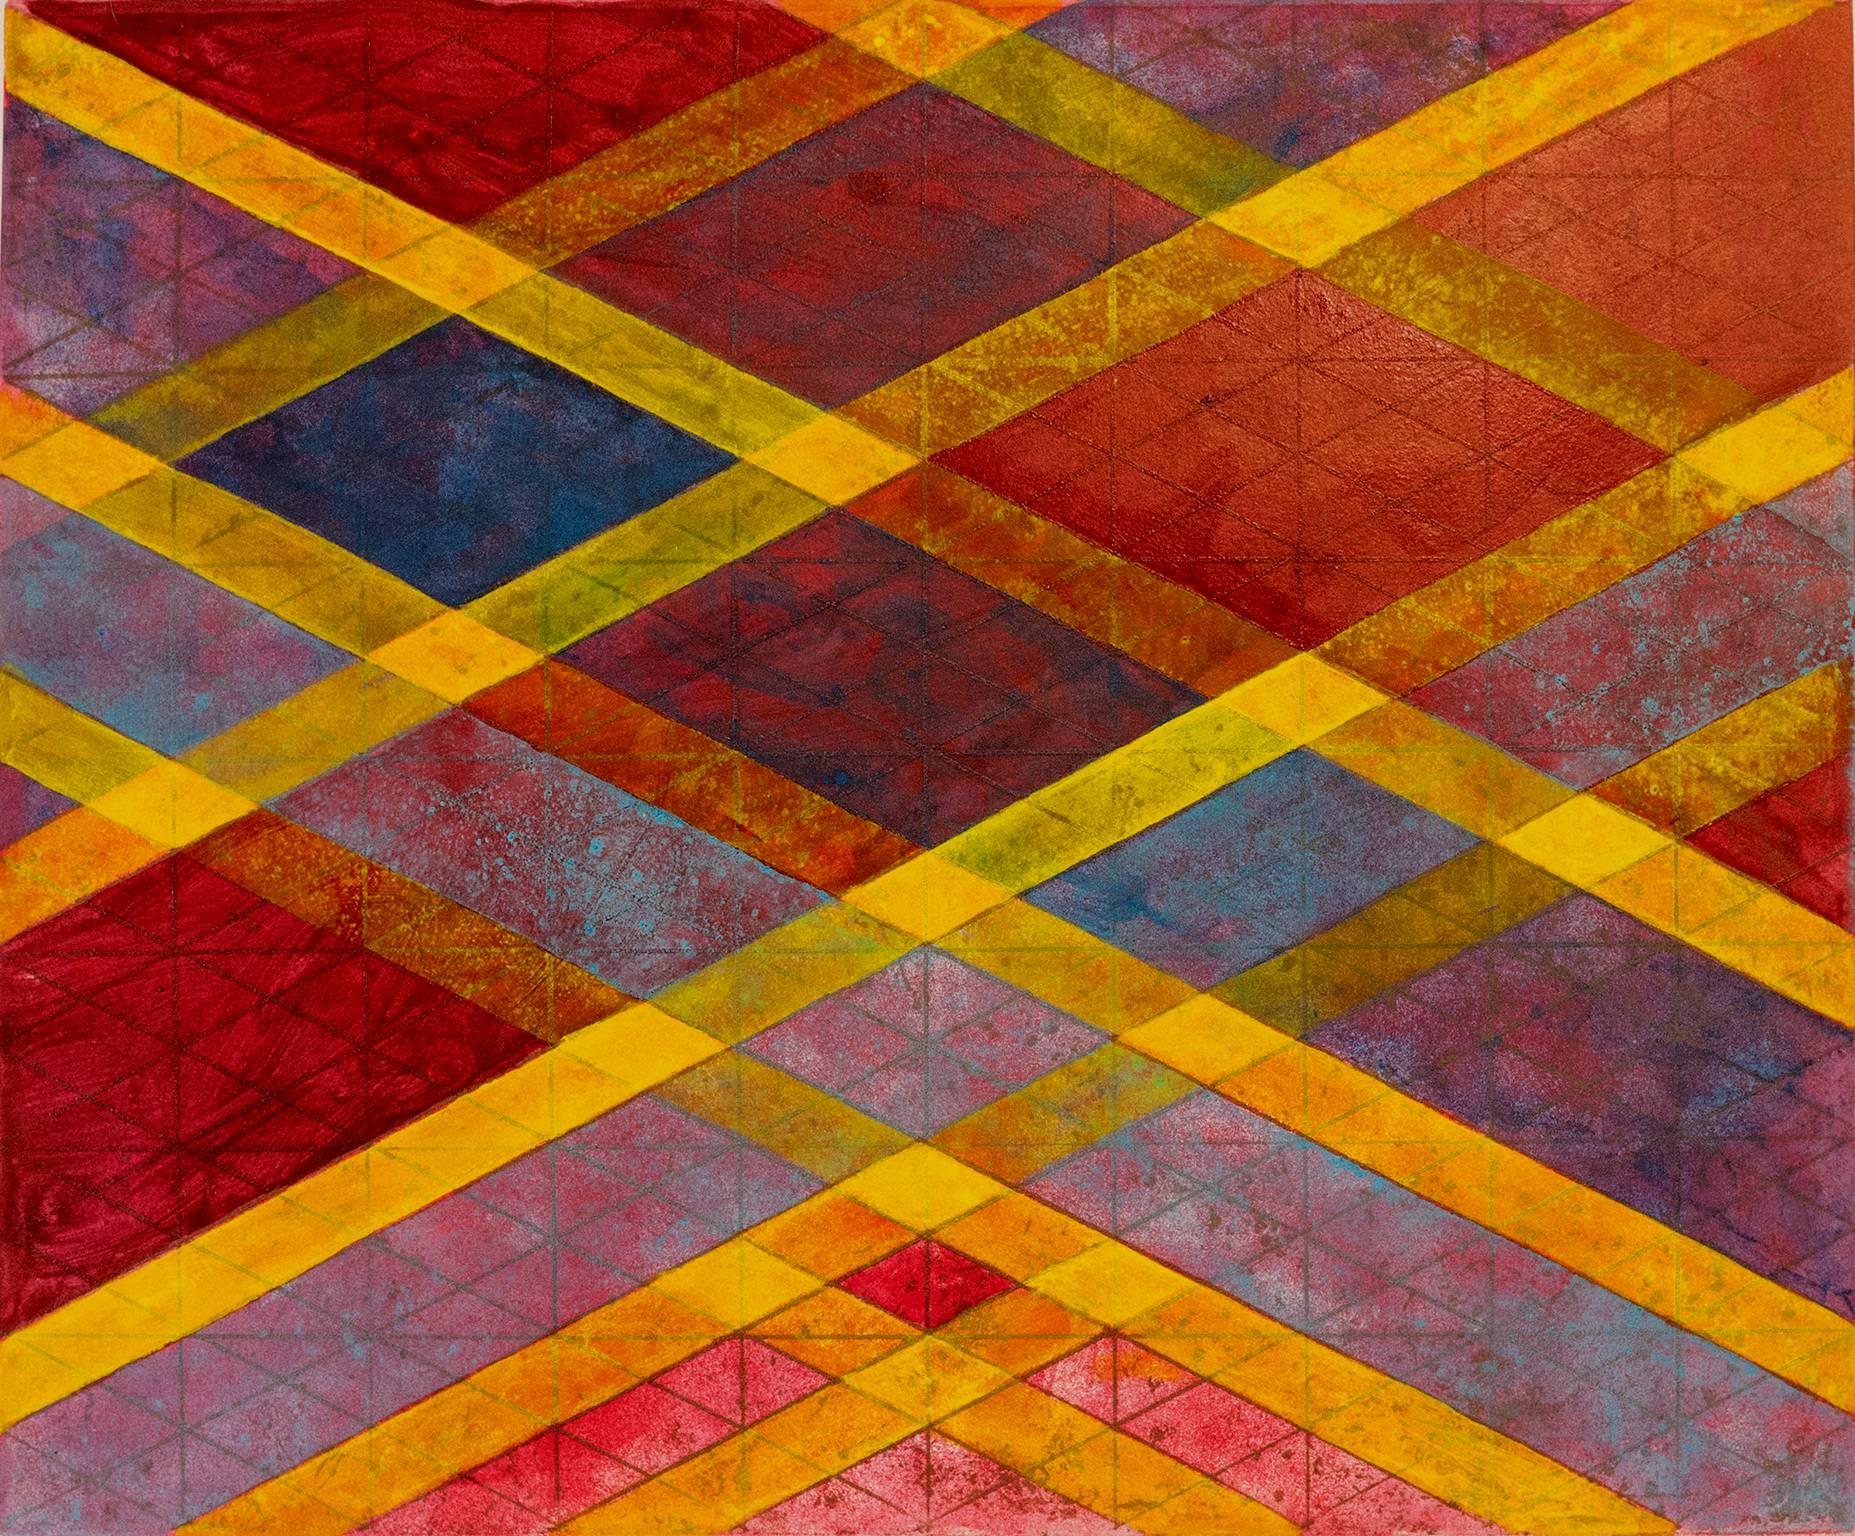 Arlene Slavin Abstract Print - Intersections/Skies 19, abstract geometric monoprint, red, yellow, blue, gold.